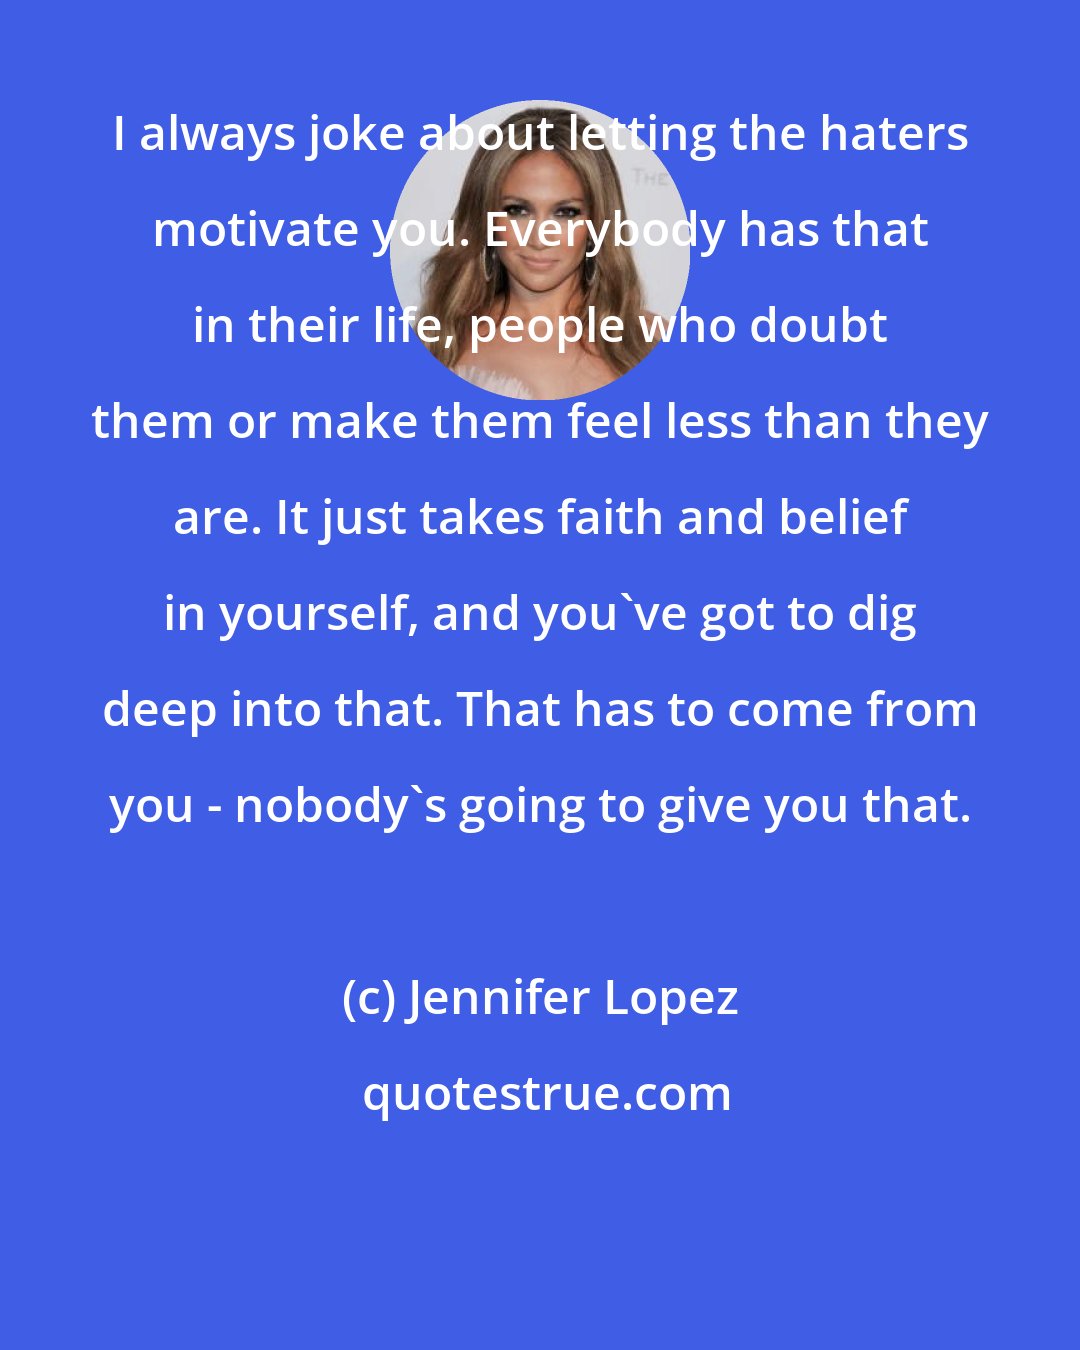 Jennifer Lopez: I always joke about letting the haters motivate you. Everybody has that in their life, people who doubt them or make them feel less than they are. It just takes faith and belief in yourself, and you've got to dig deep into that. That has to come from you - nobody's going to give you that.